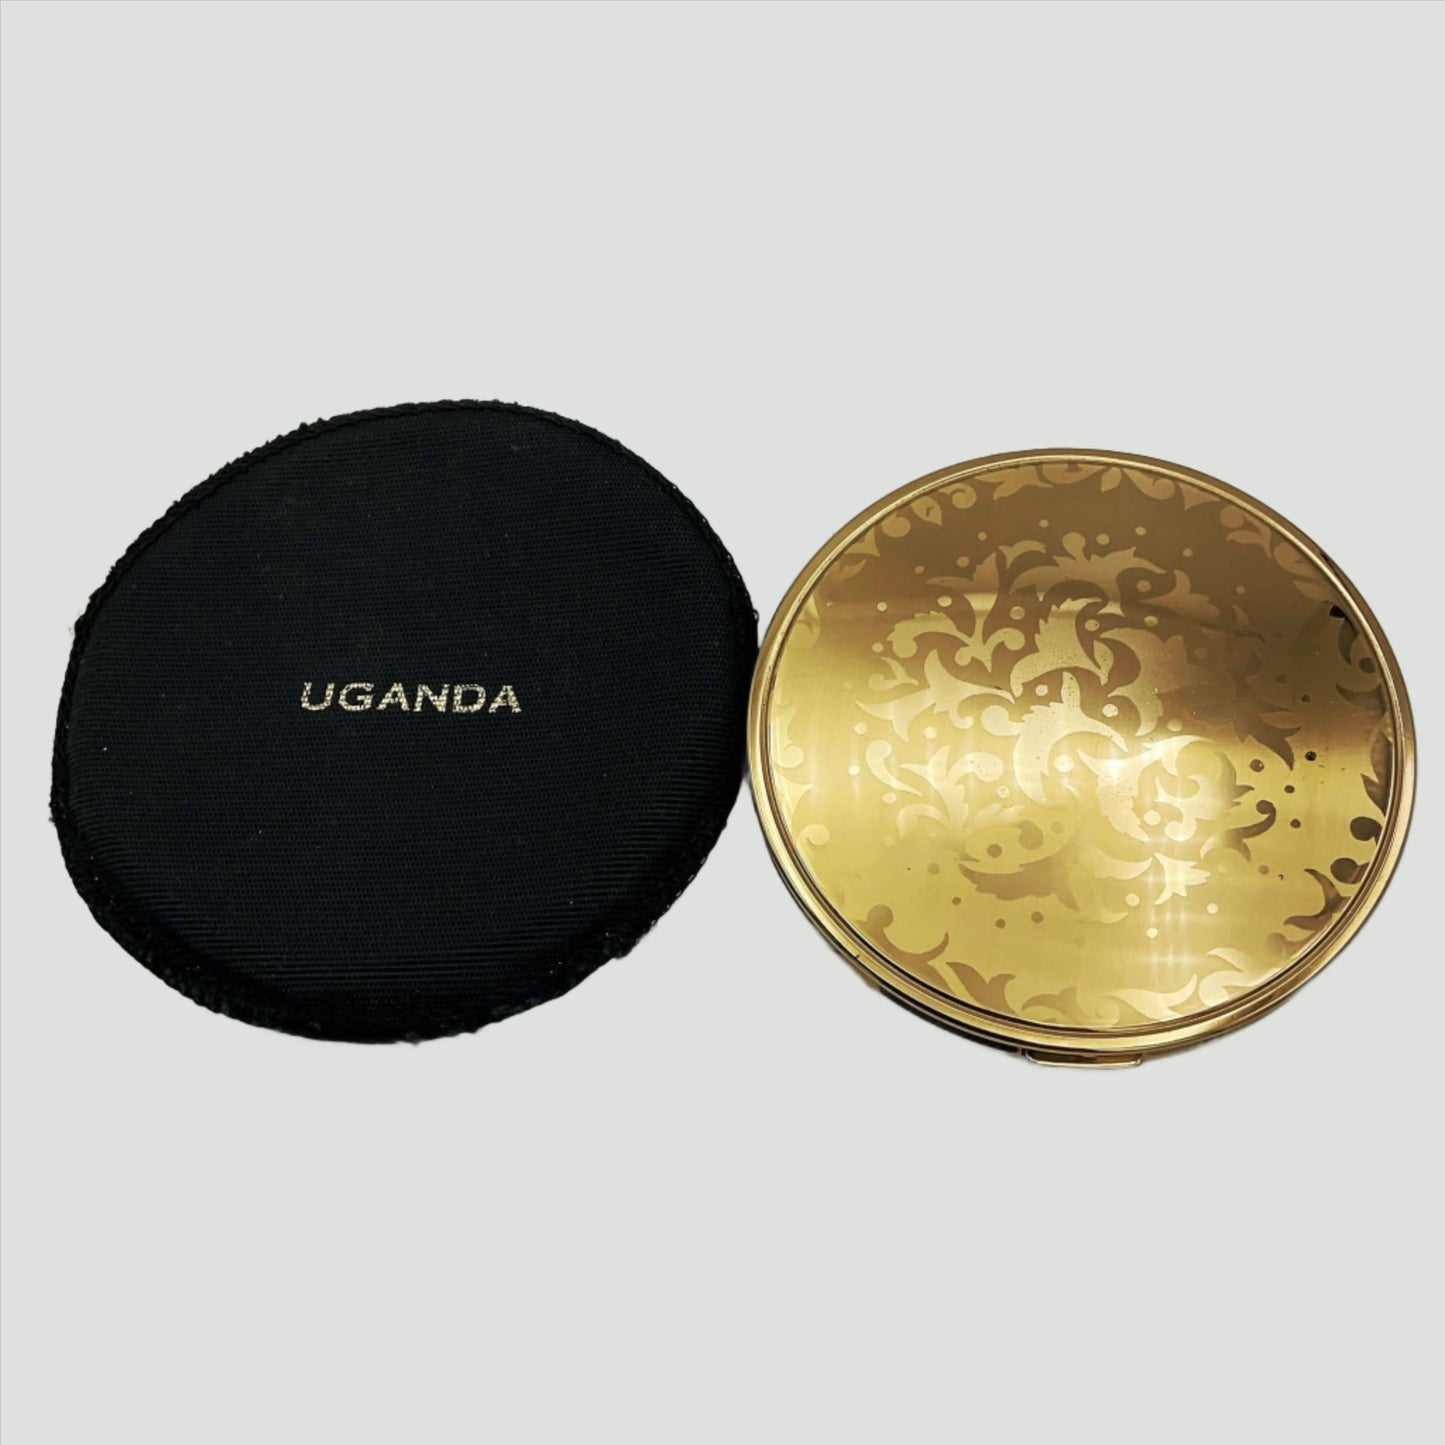 gold coloured lid of powder compact with leaf pattern on a black felt case with Uganda imprinted on it.